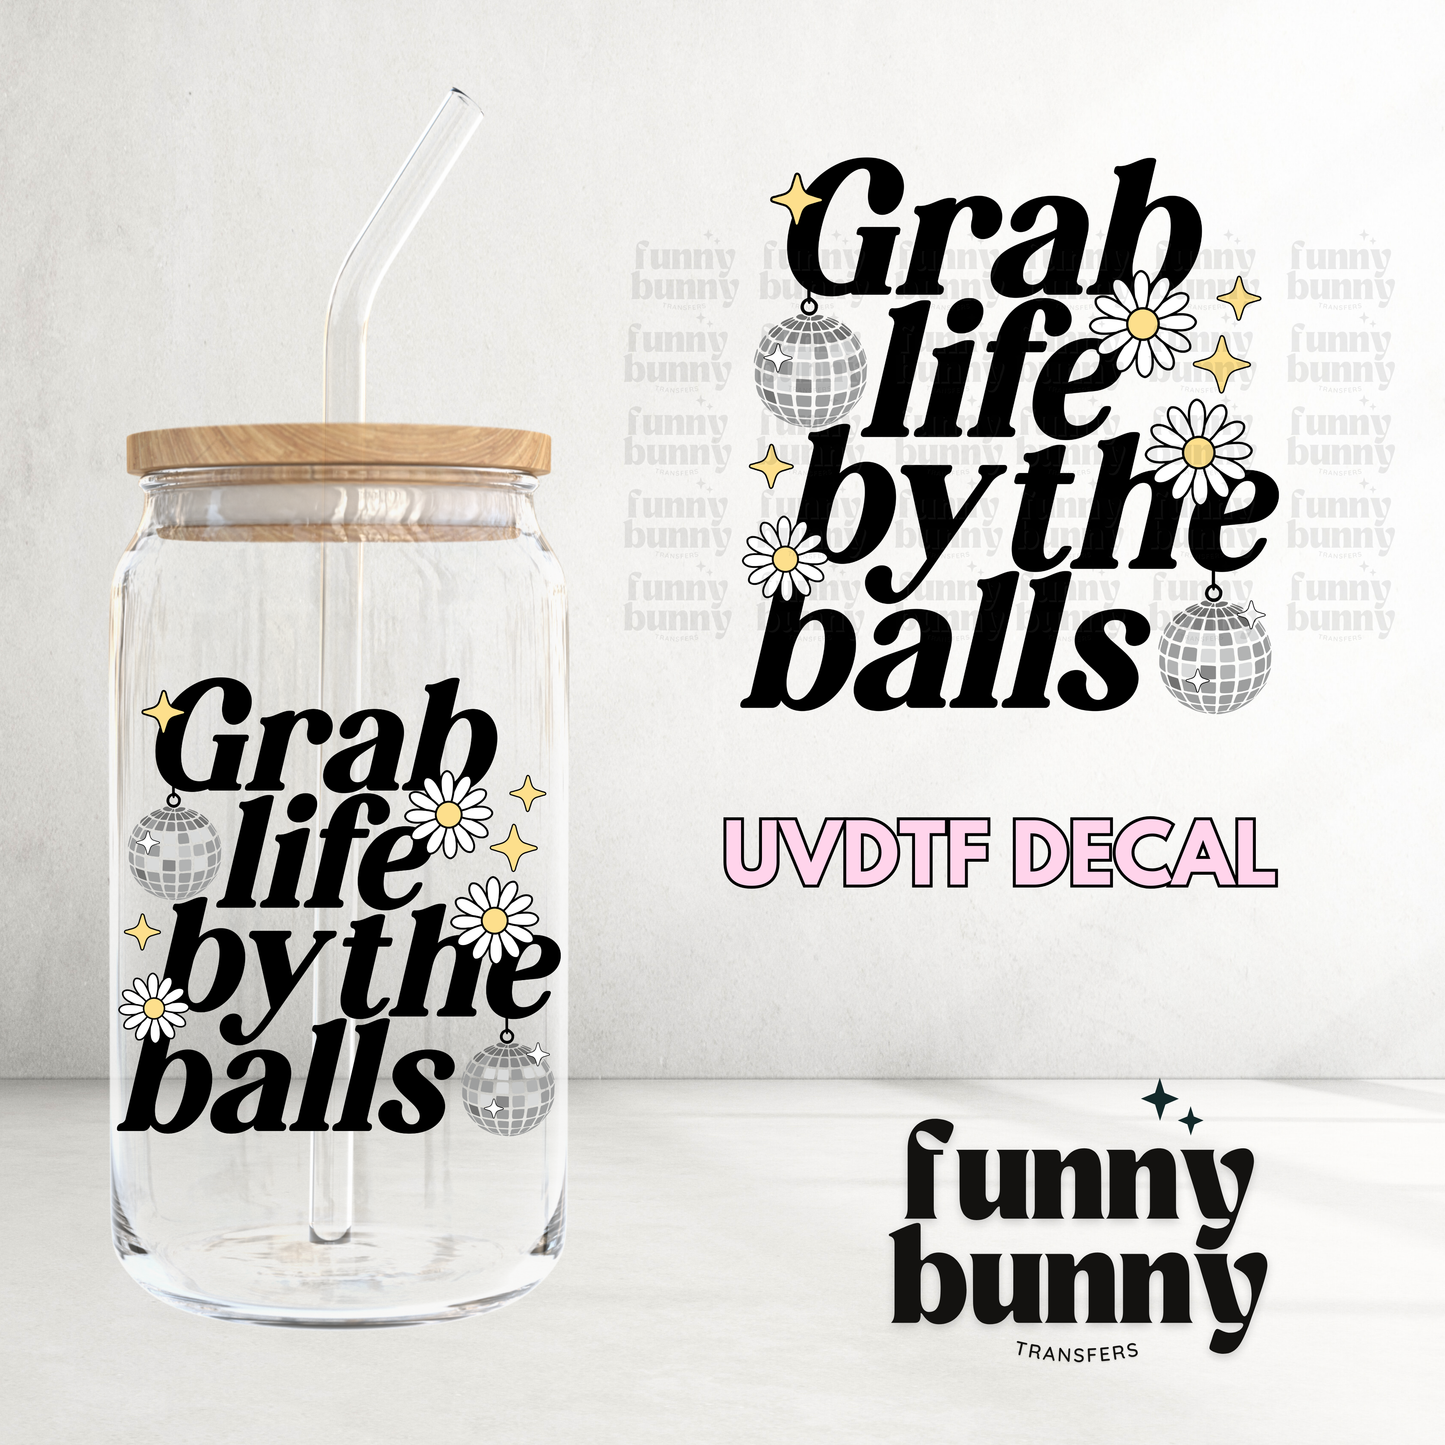 Grab Life By the Balls - UVDTF Decal